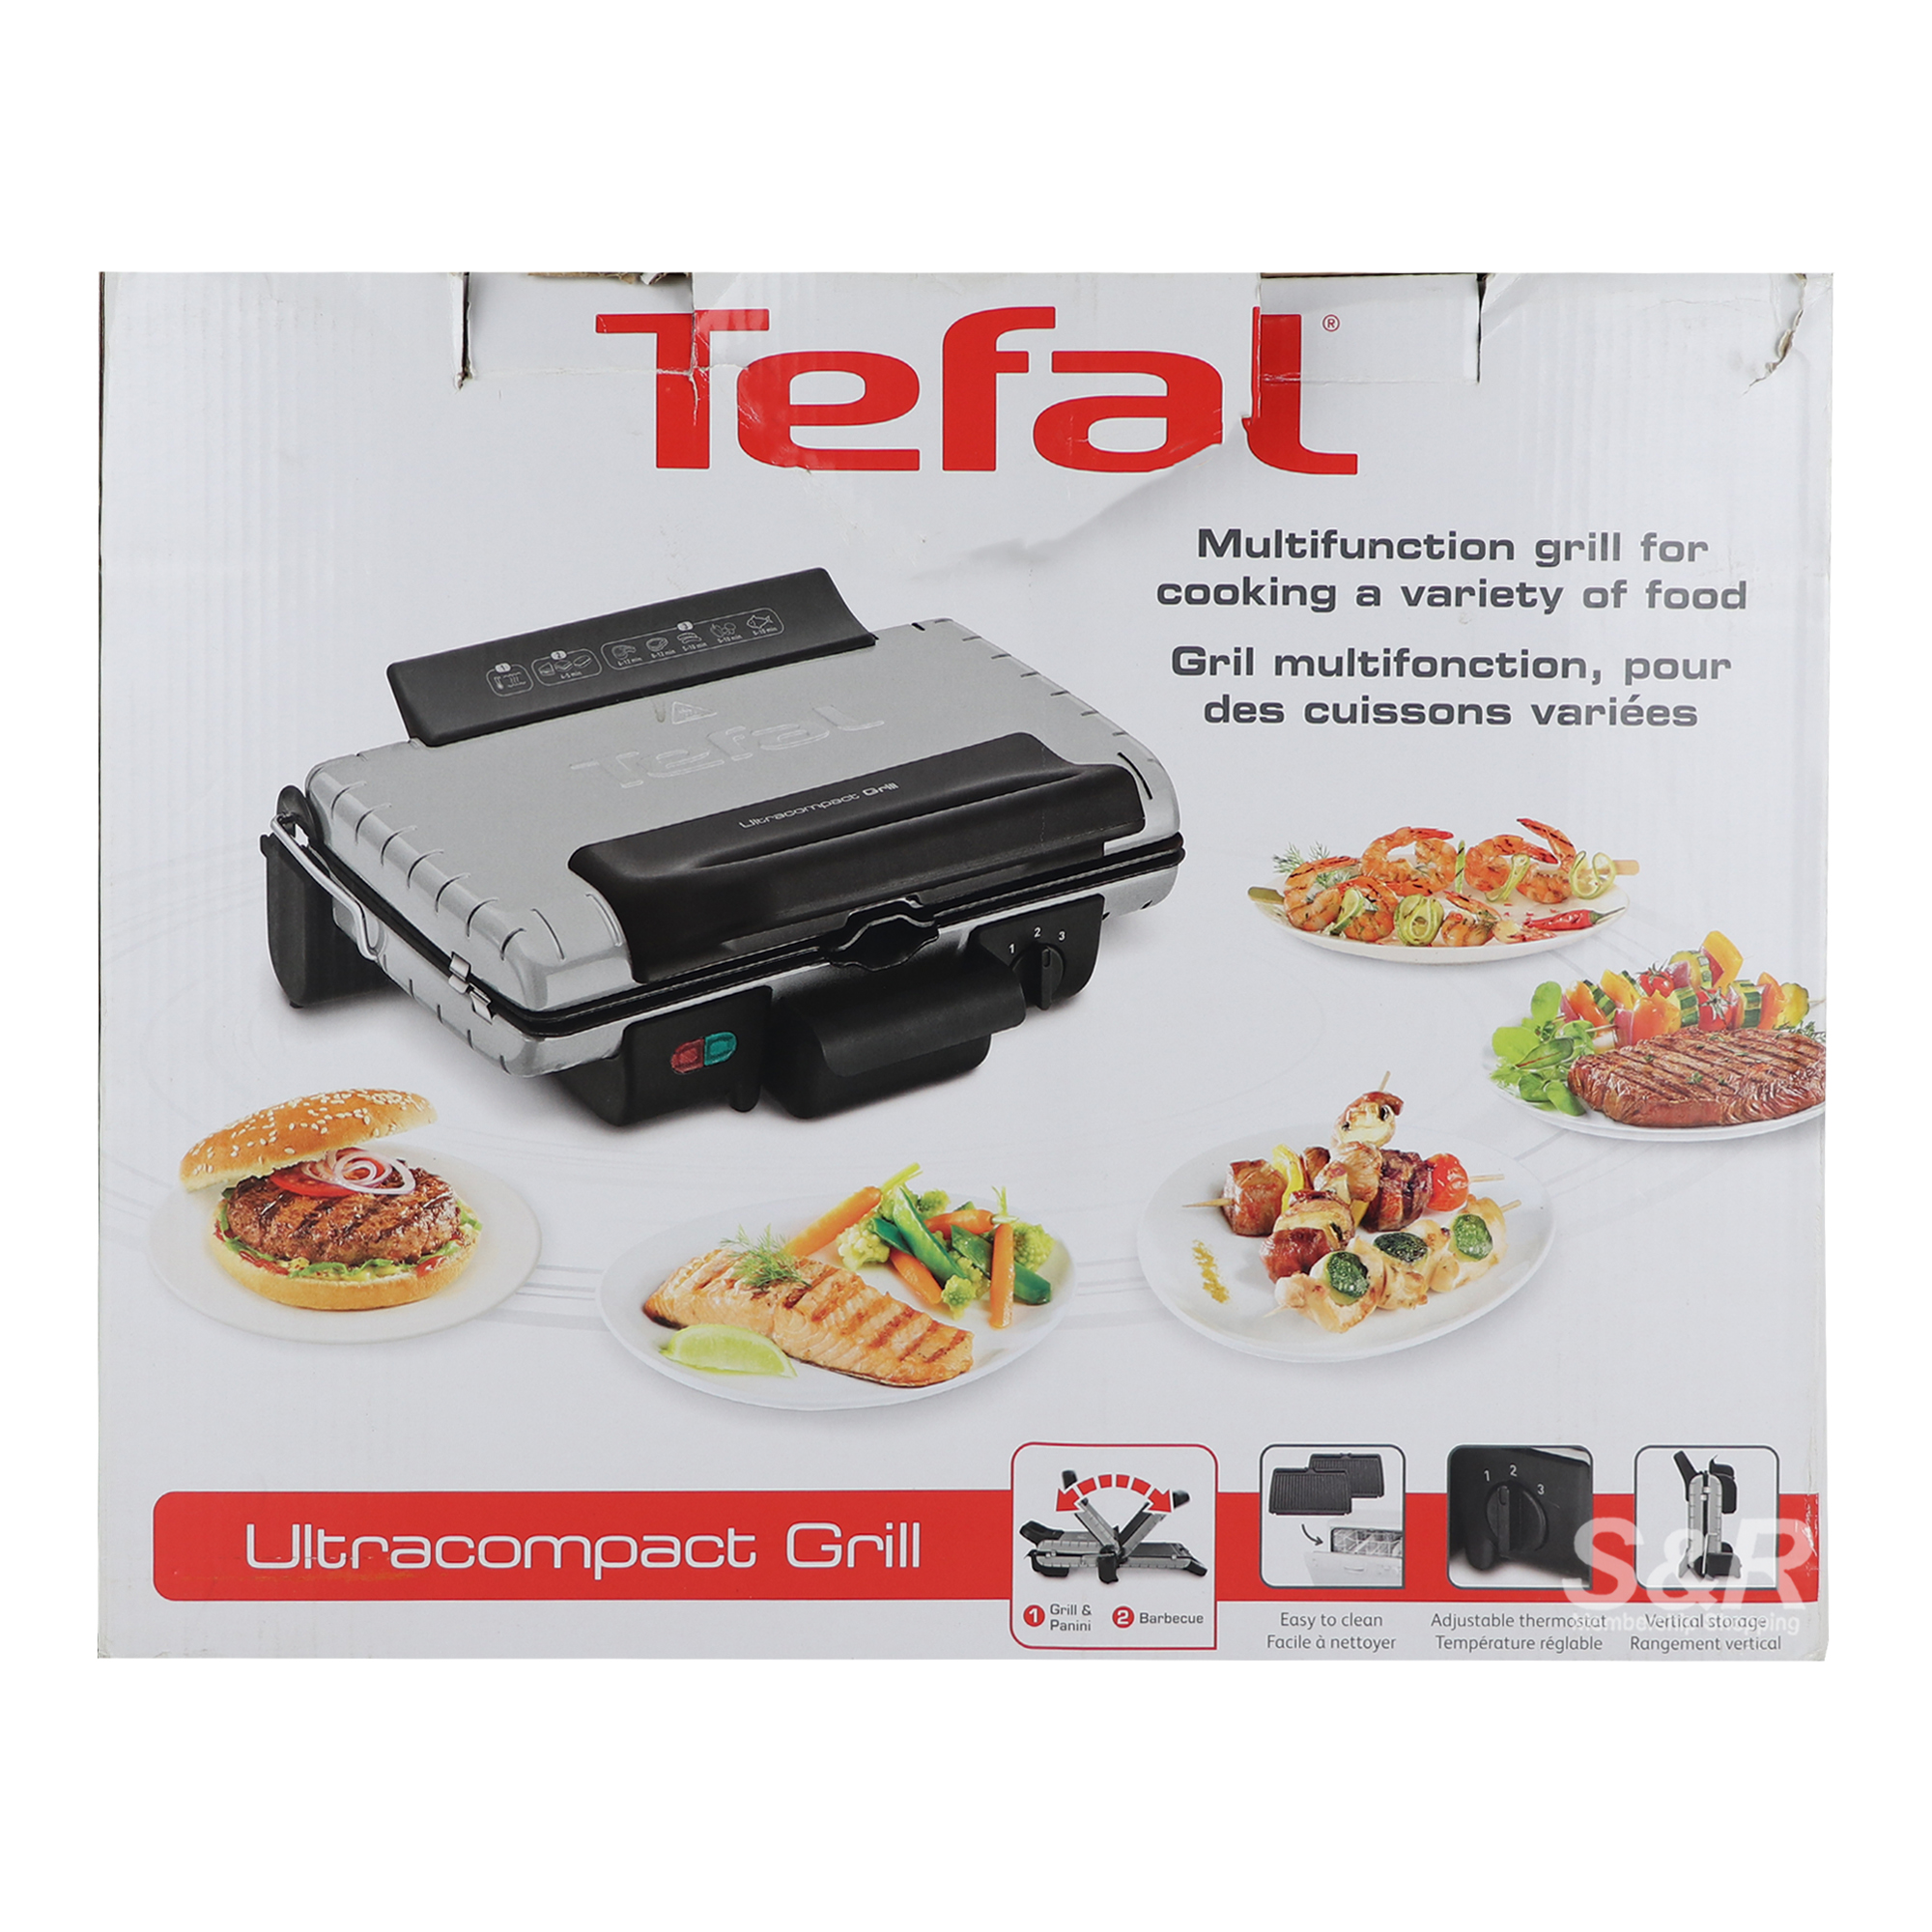 Tefal Ultracompact Meat Grill GC302B28